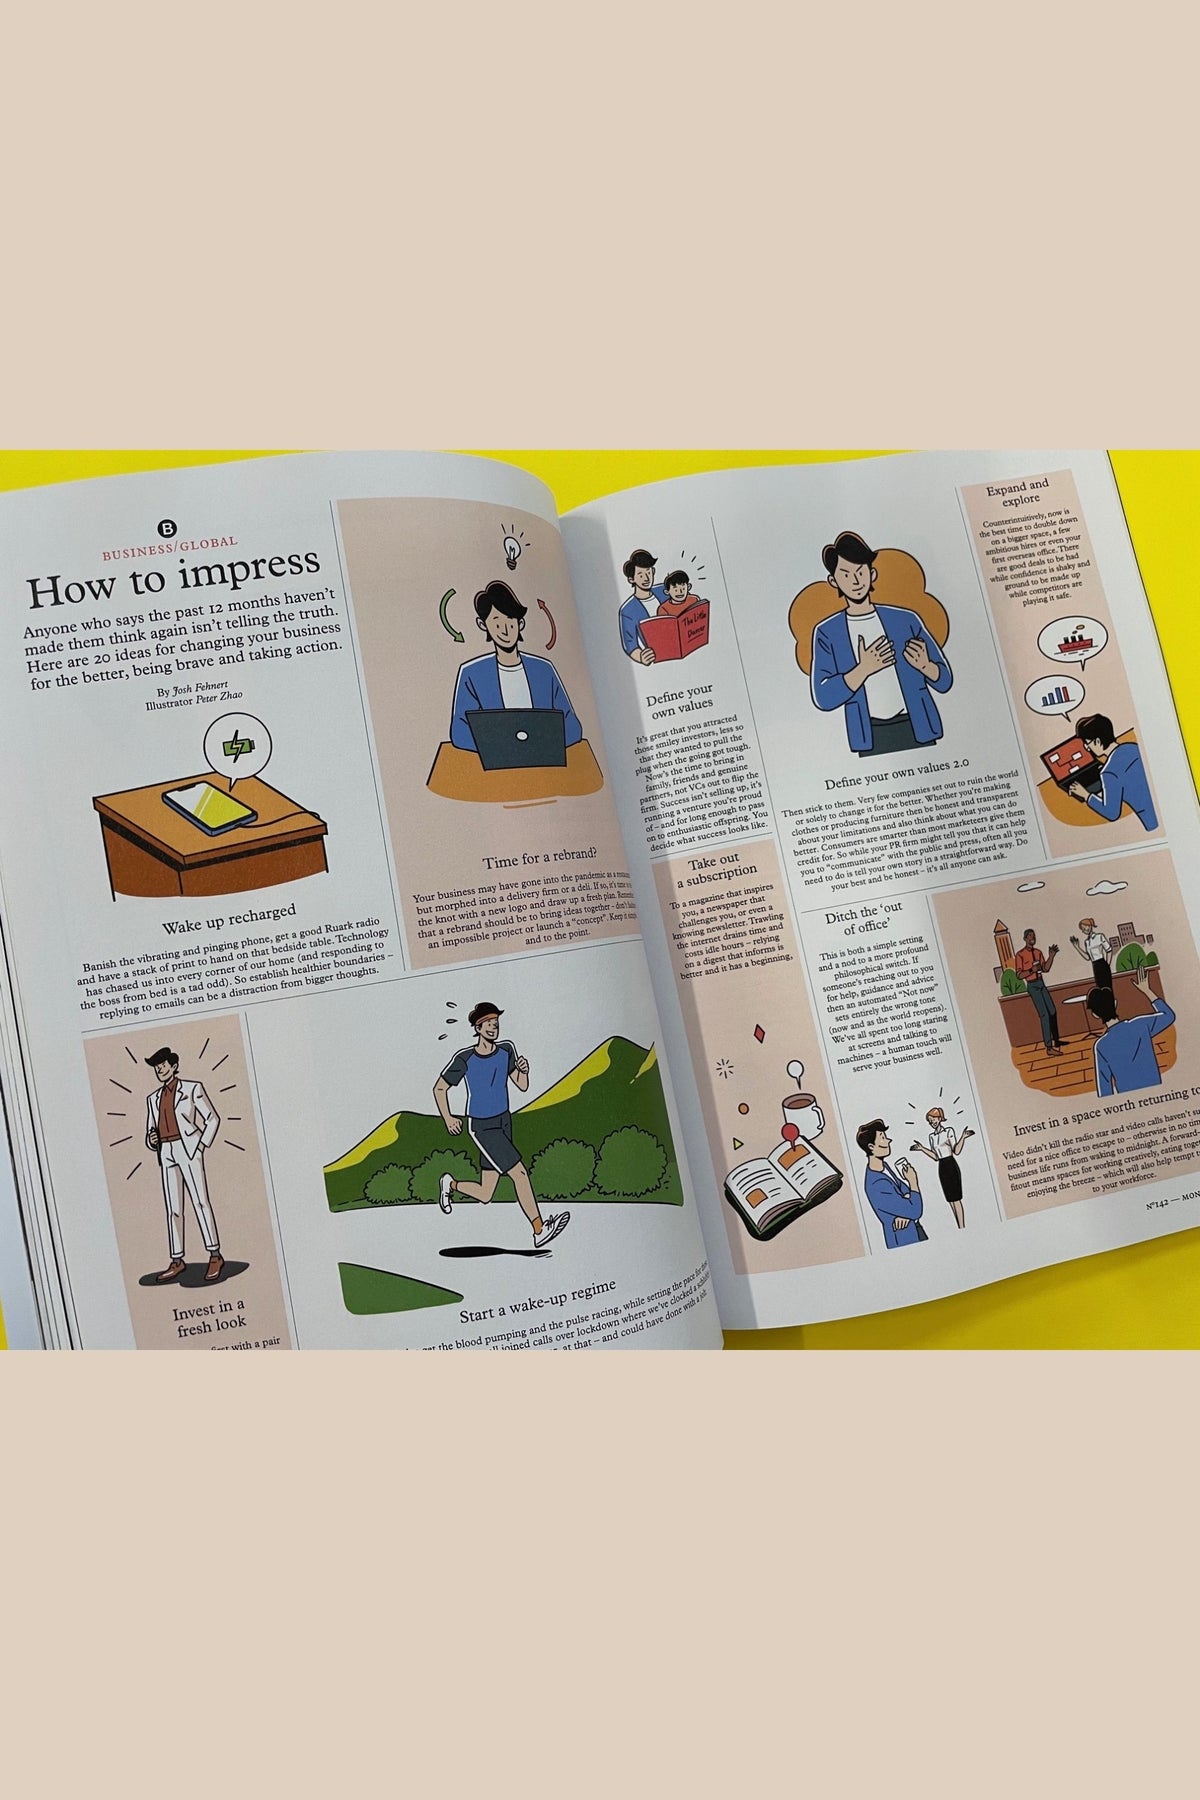 Monocle Magazine Issue 142 How to Impress article